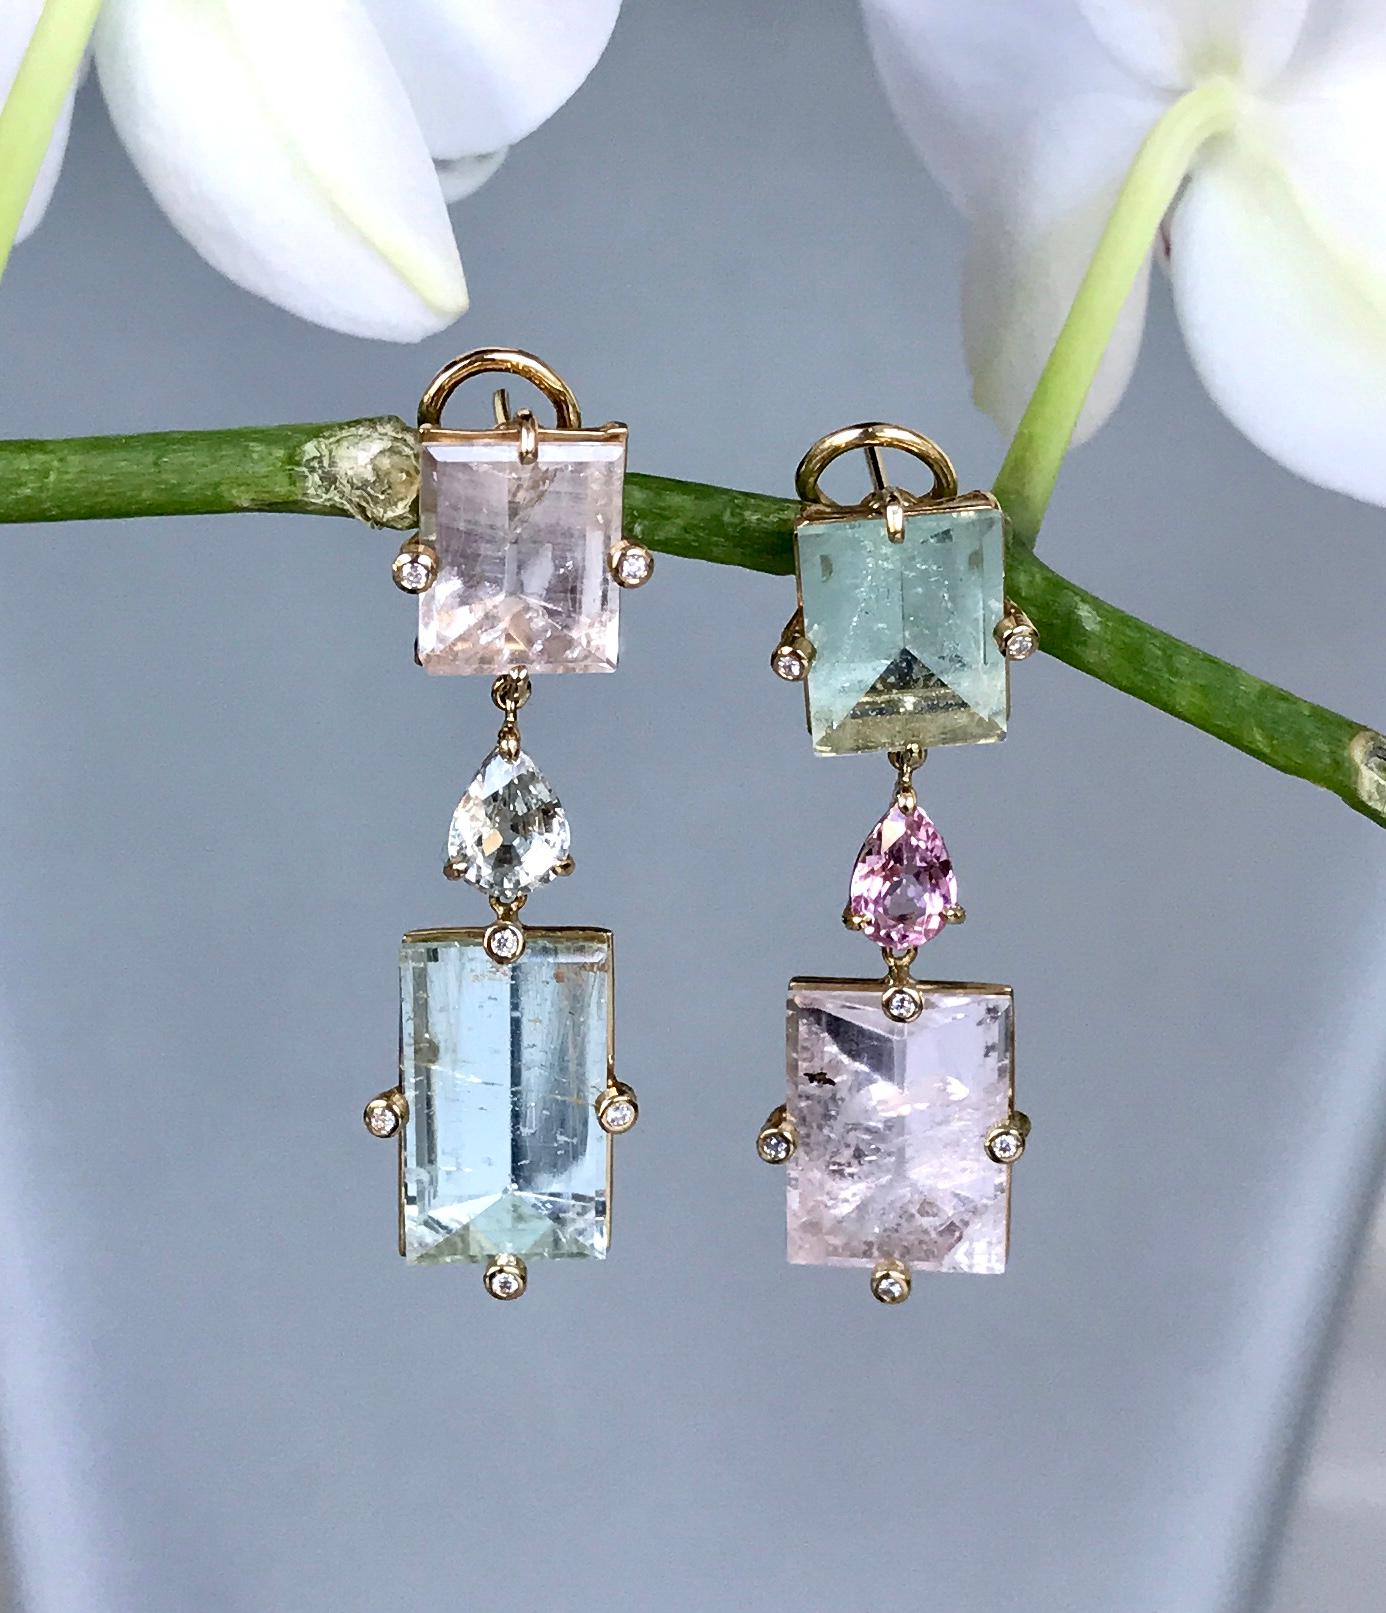 These Joon Han one-of-a-kind drop dangle earrings of mirror-cut beryls and morganites, fancy faceted sapphires, and diamonds are uniquely mismatched. Handcrafted in 18K yellow gold, the subtle pastel shades of light greens and pinks make these